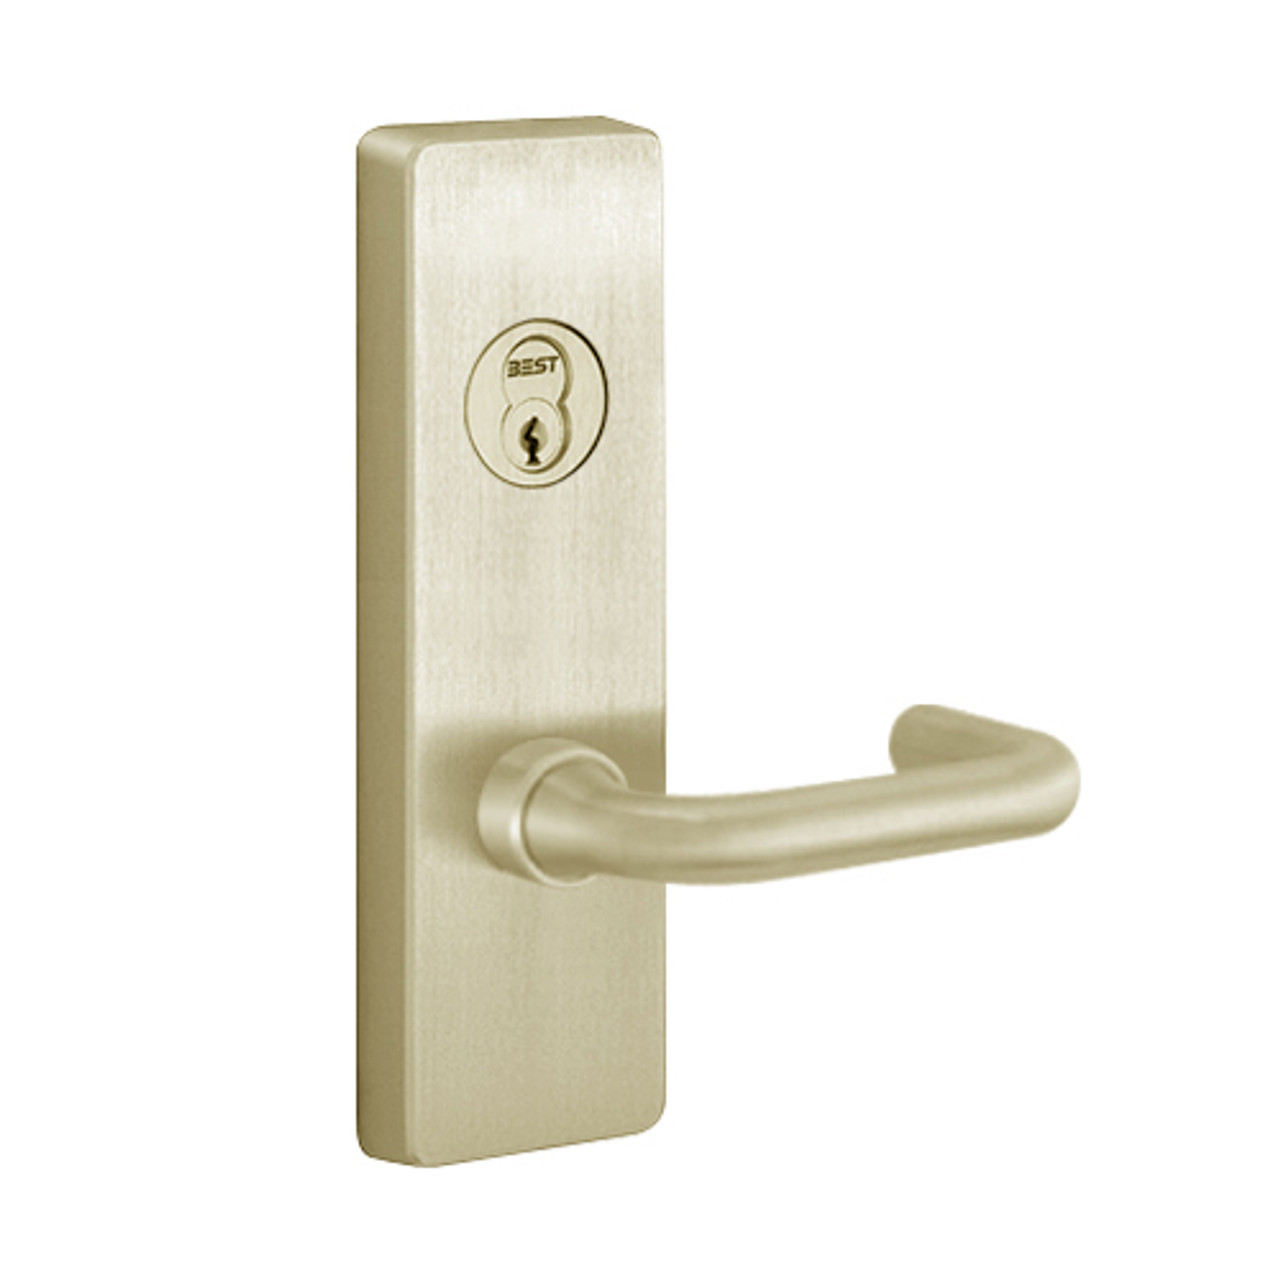 Y4908C-606-LHR PHI Key Controls Lever Trim with C Lever Design for Olympian Series Exit Device in Satin Brass Finish